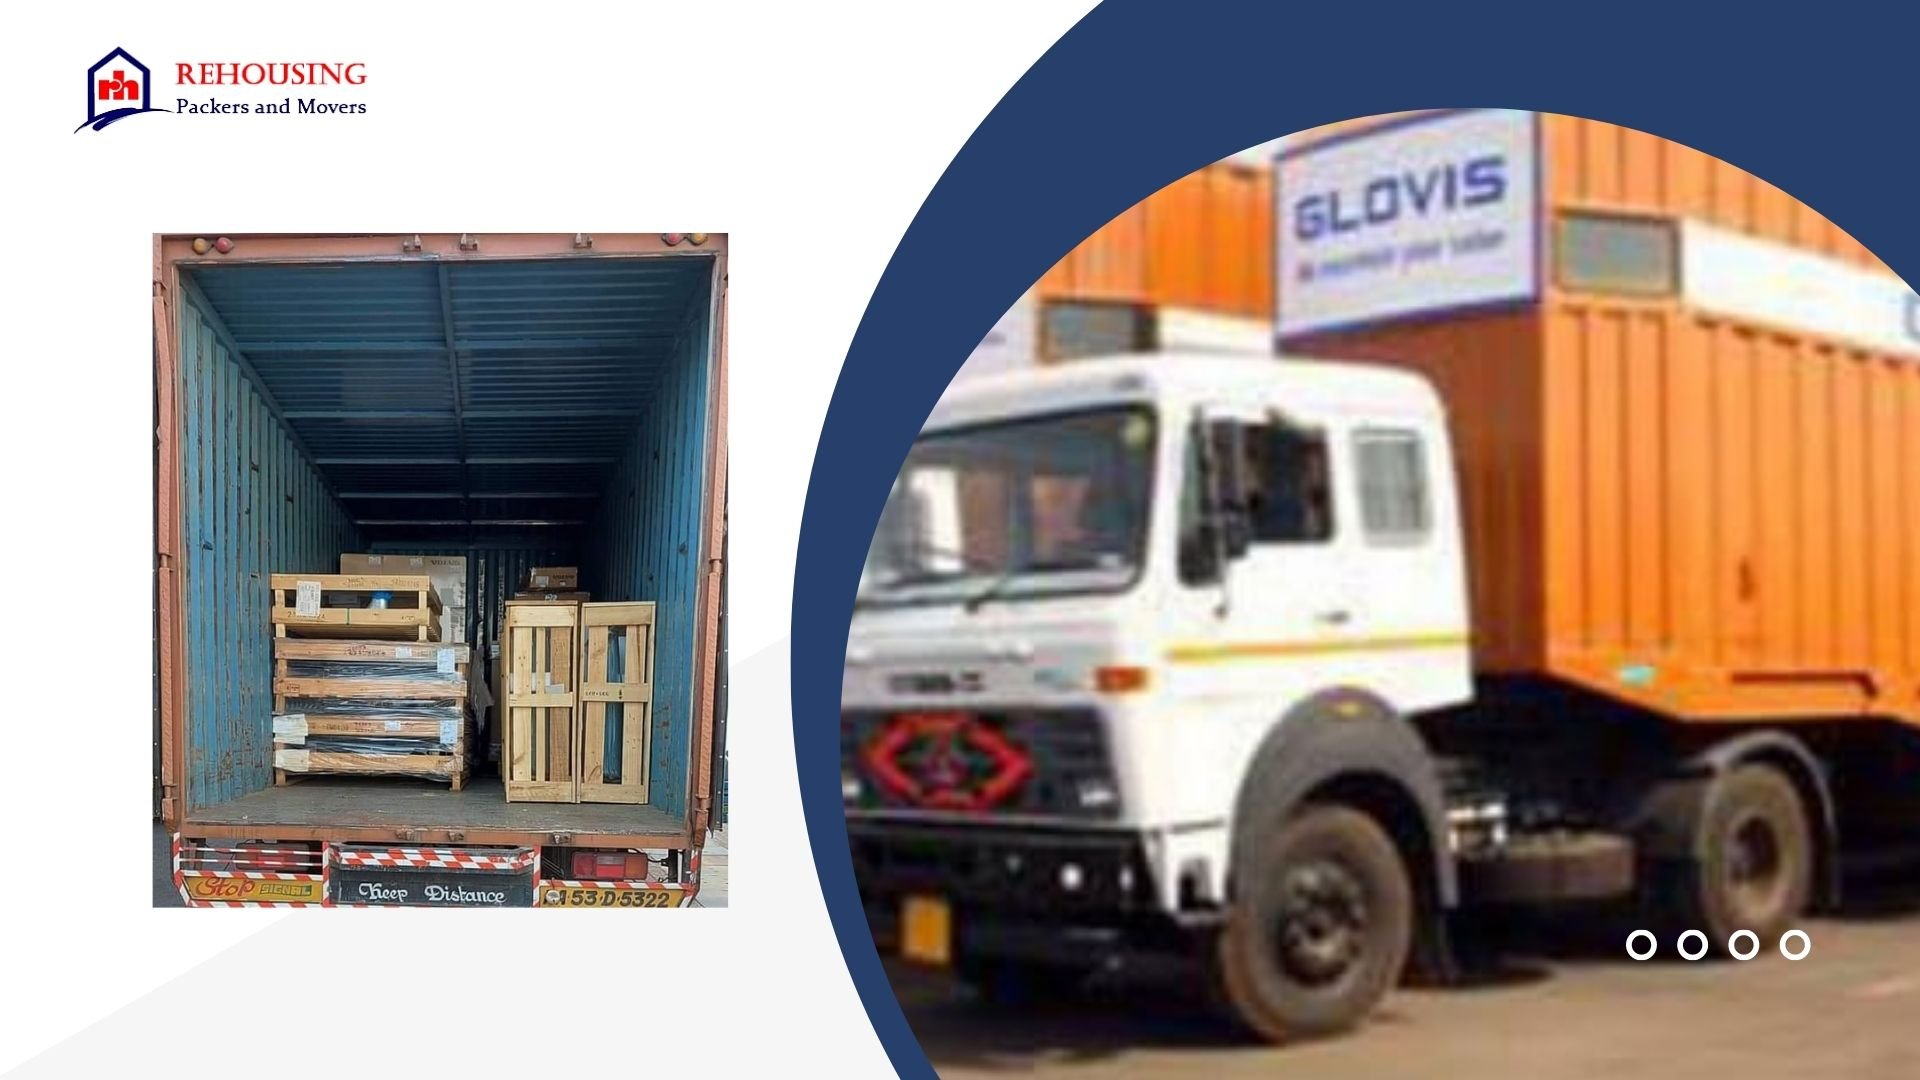 Packers and Movers From Dehradun to Bhopal | Rehousing packers and movers